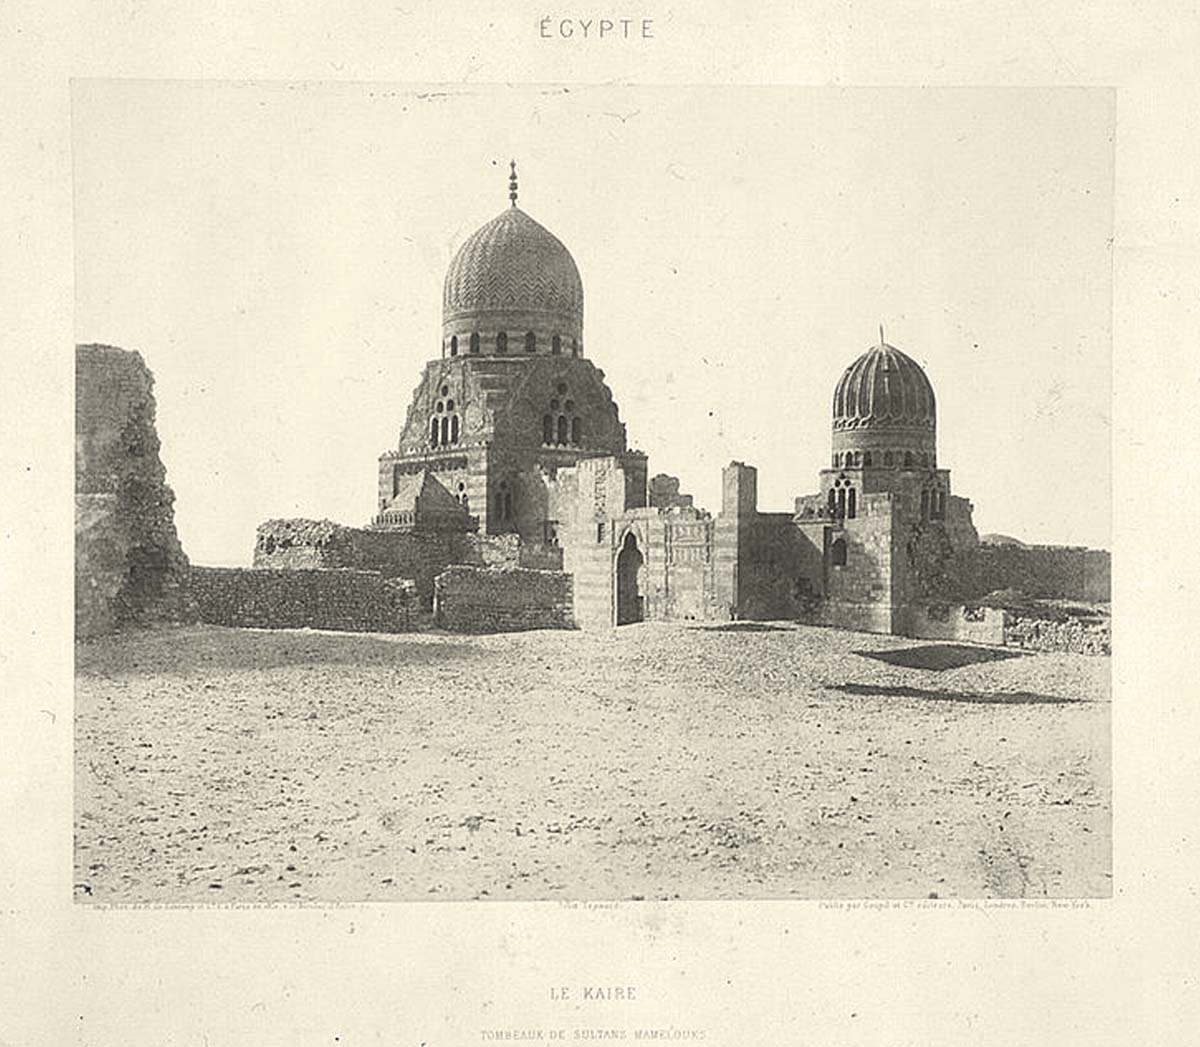 Cairo. Tombs of sultans Mamelukes, 1858